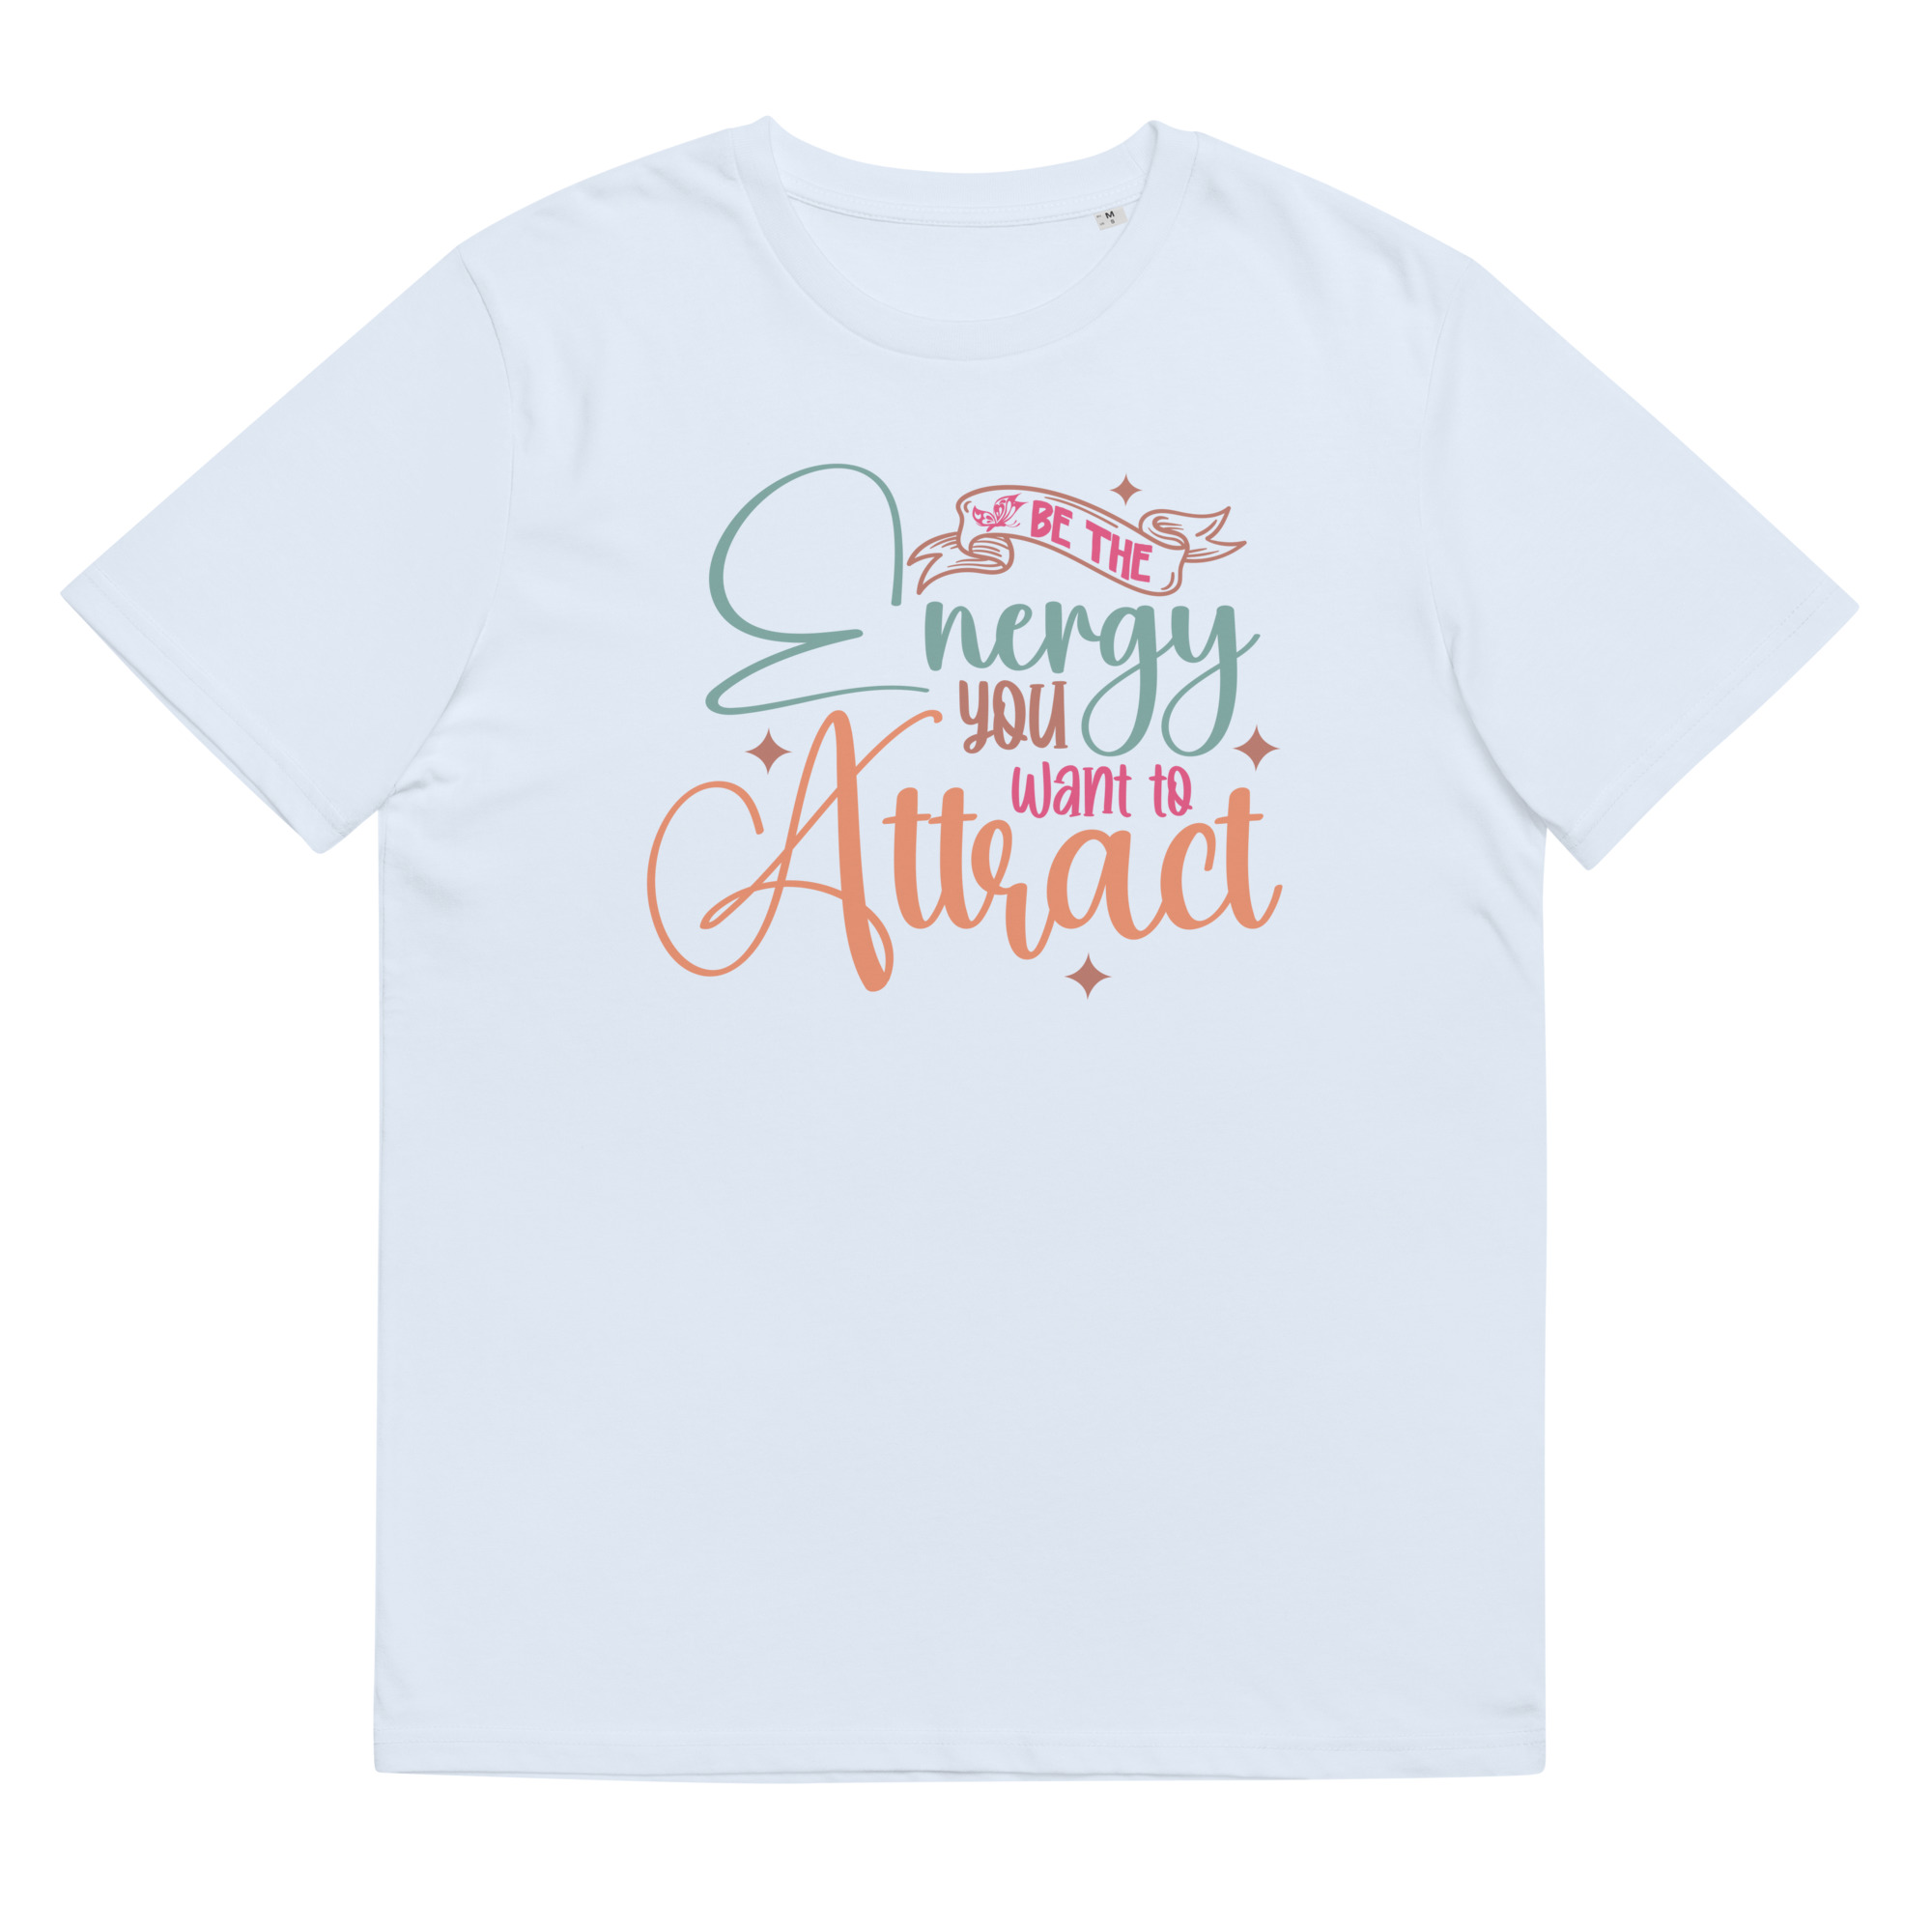 Be The Energy You Want To Attract - Organic Unisex Motivational T-Shirt